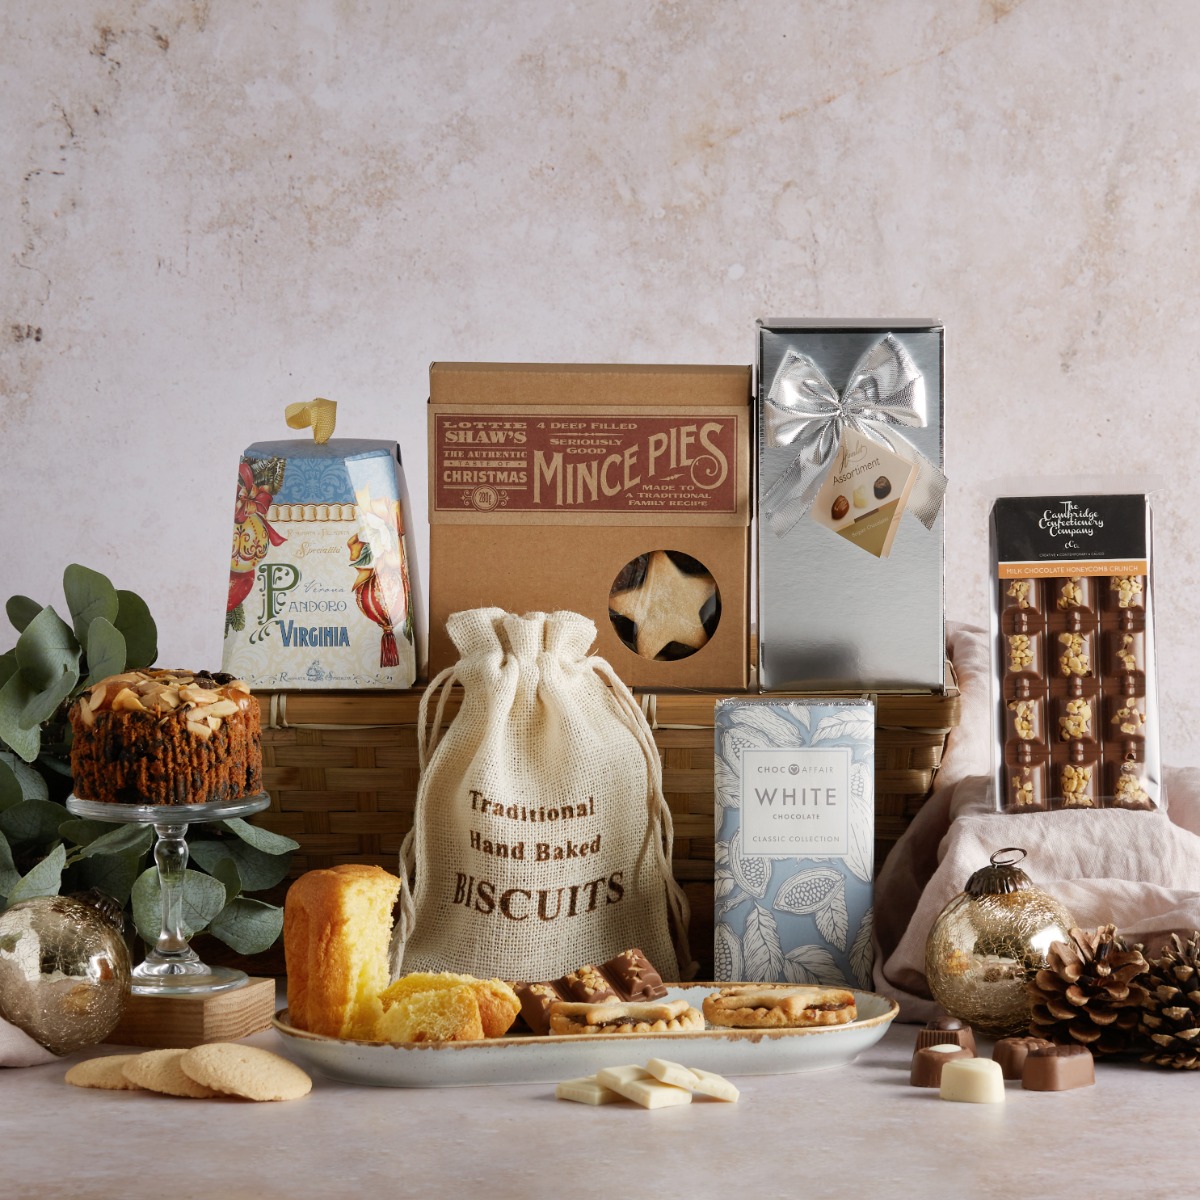 The White Christmas Hamper with contents on display